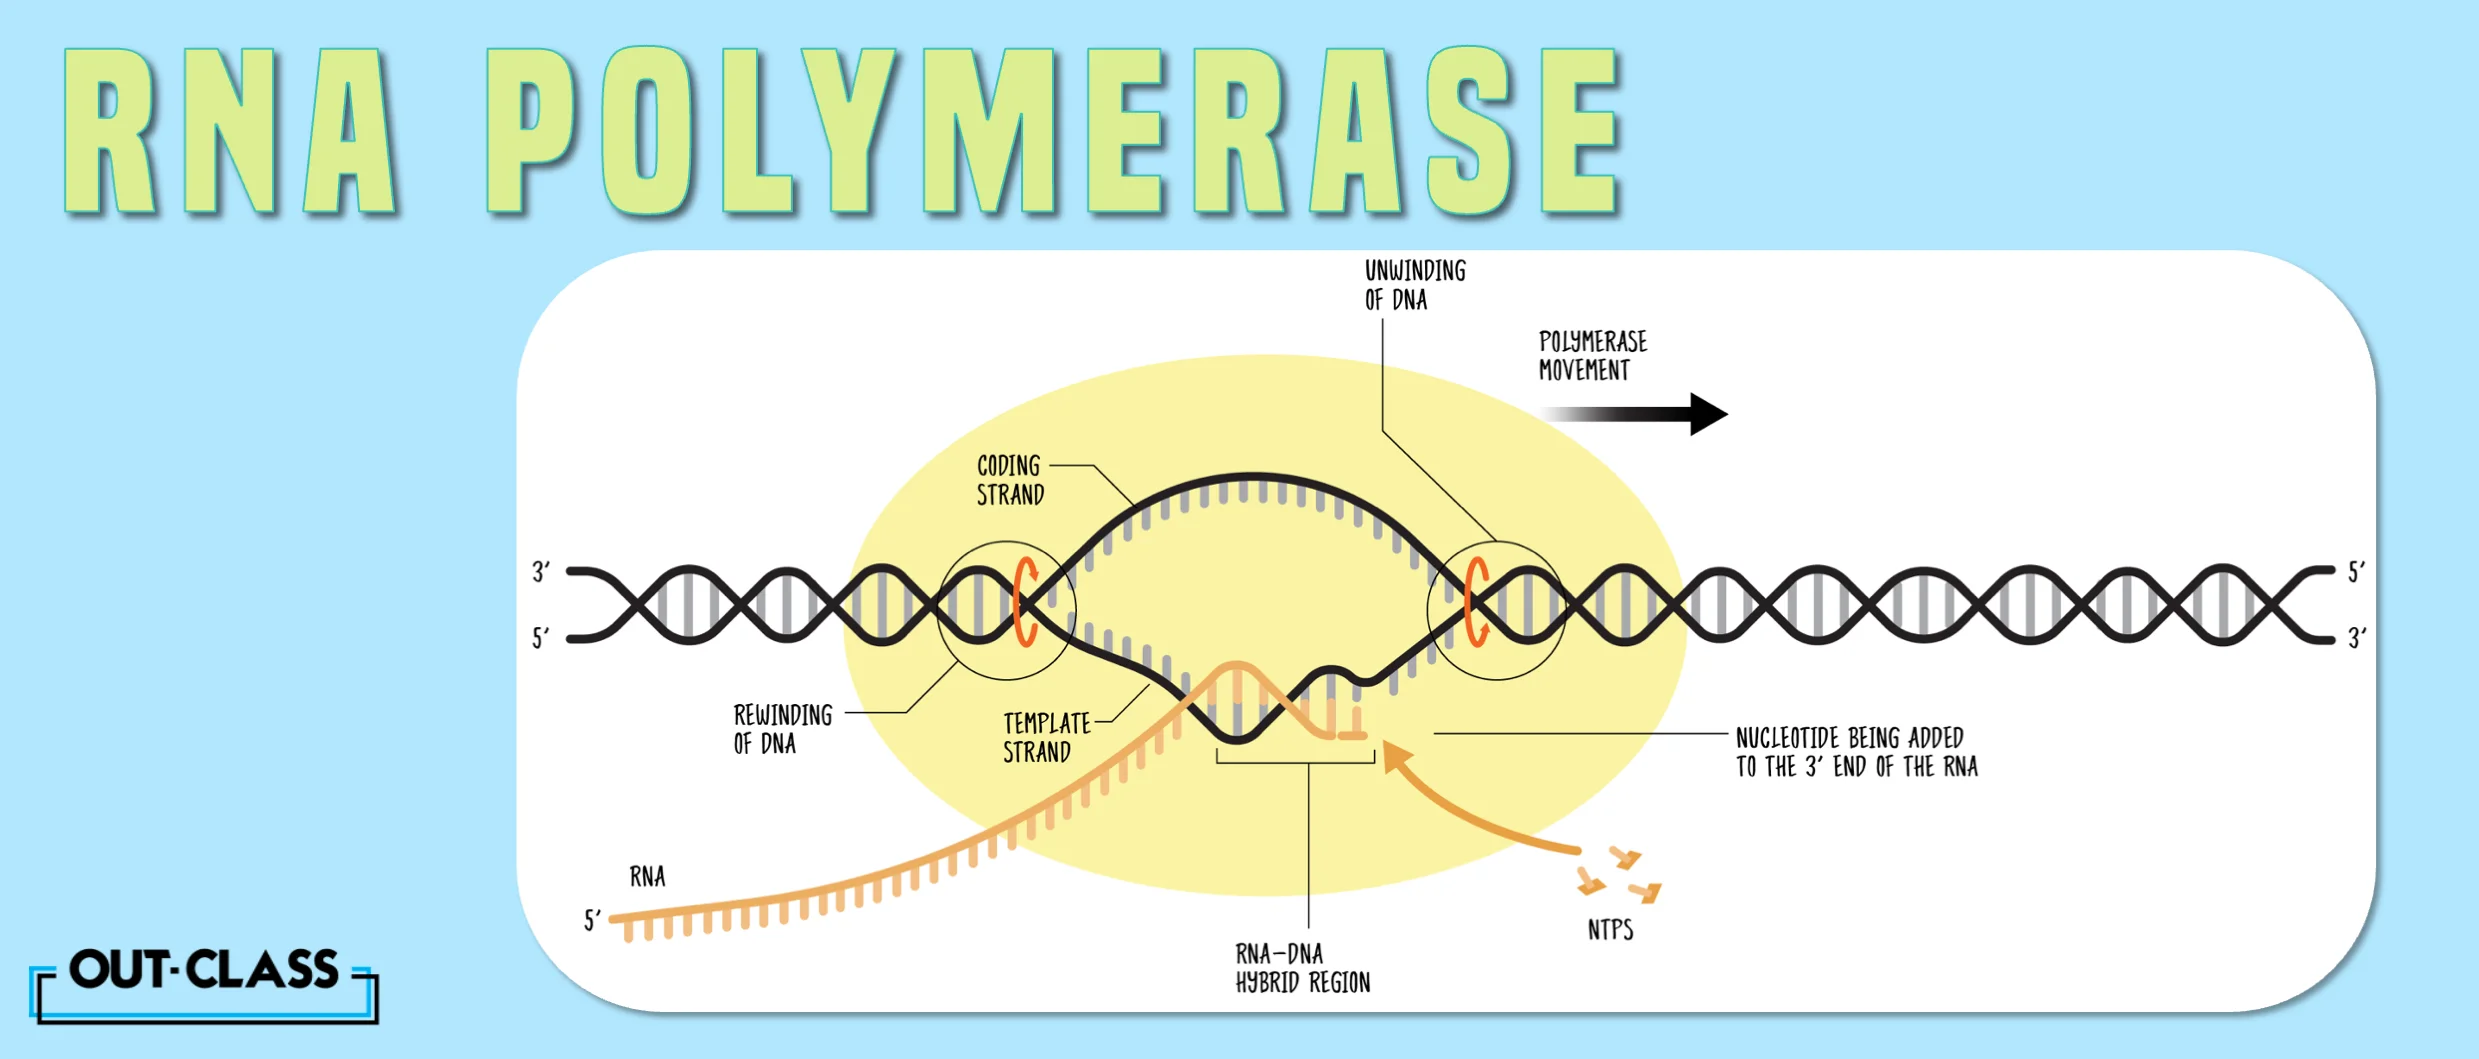 The pictures answers the question what is the role of RNA Polymerase in the process of transcription as well as the function on rna polymerase